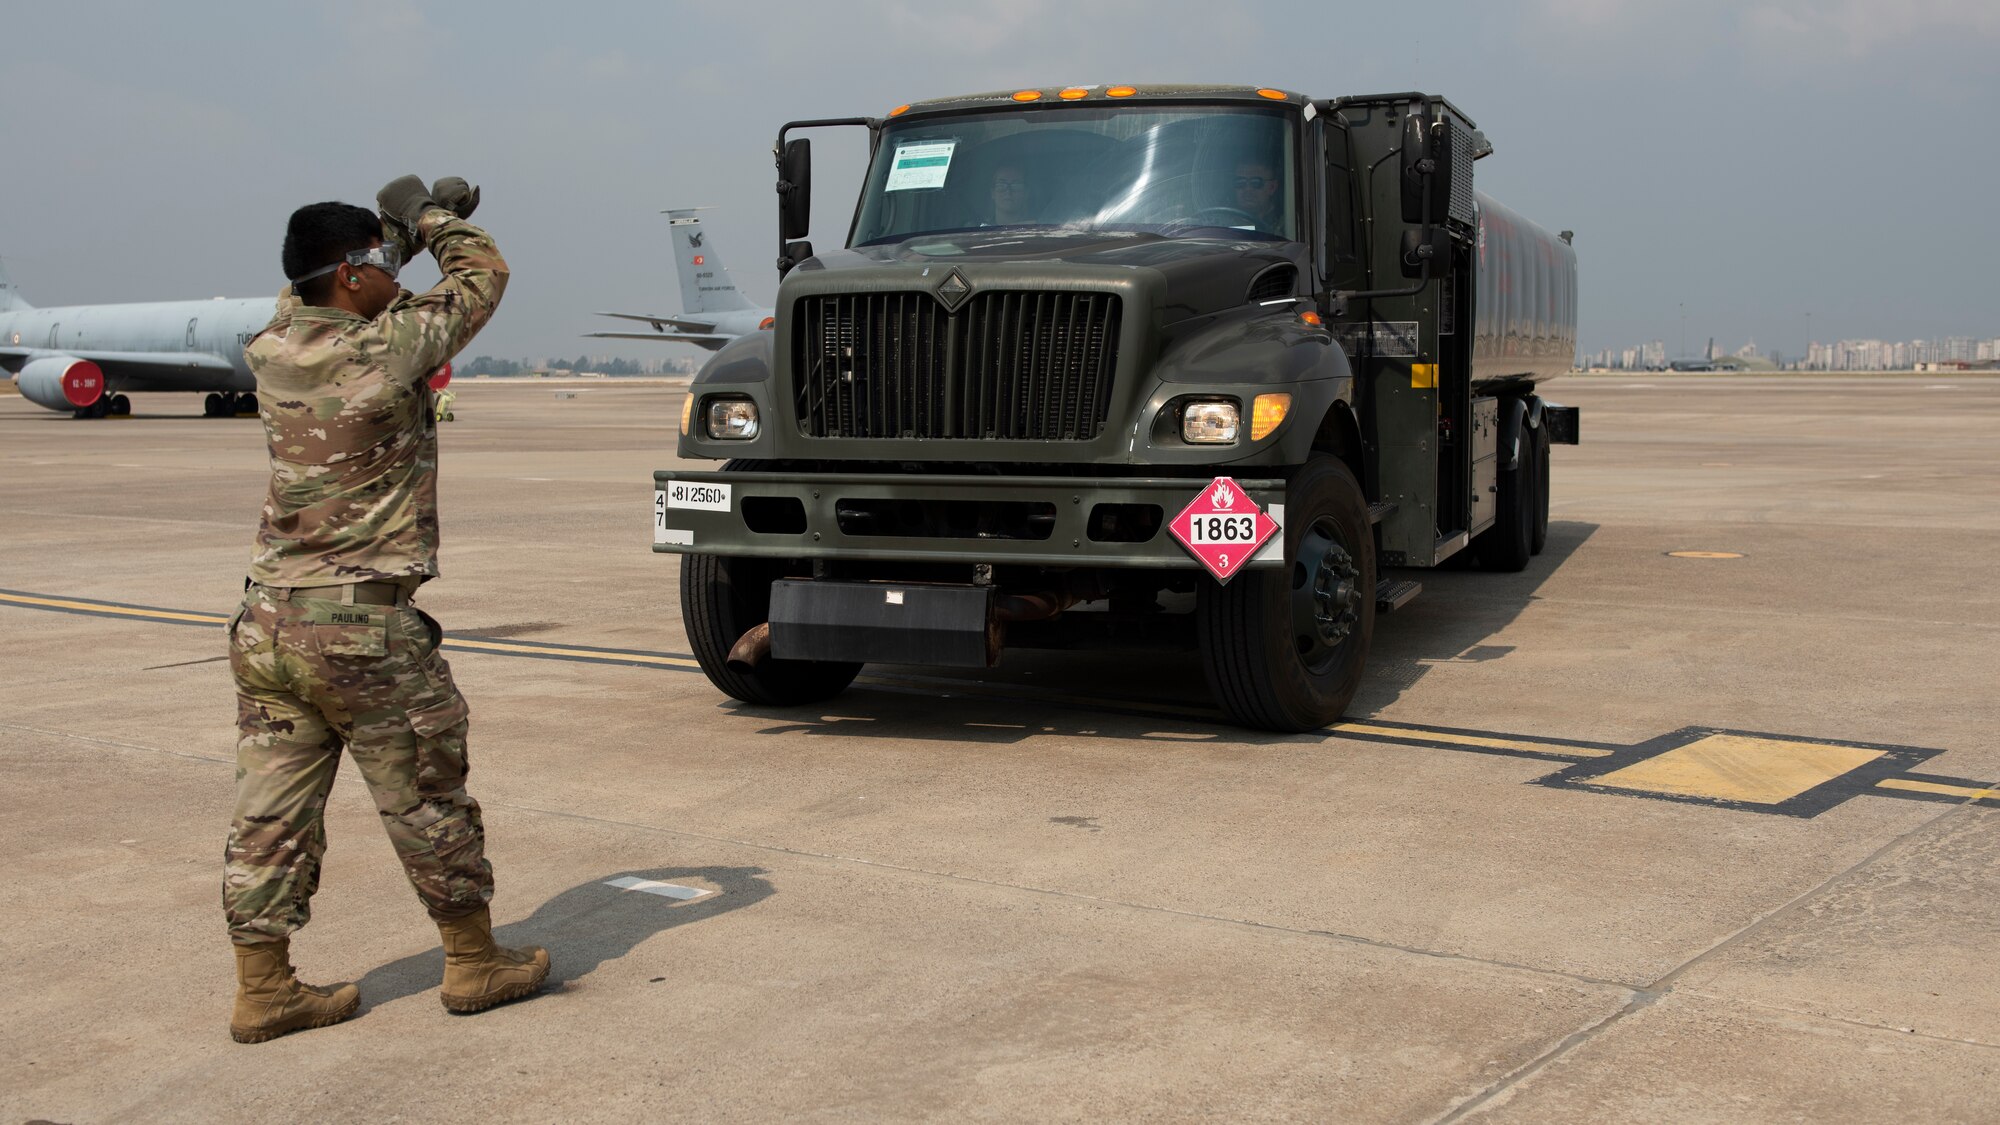 Airman stopping a fuel truck with hand signals